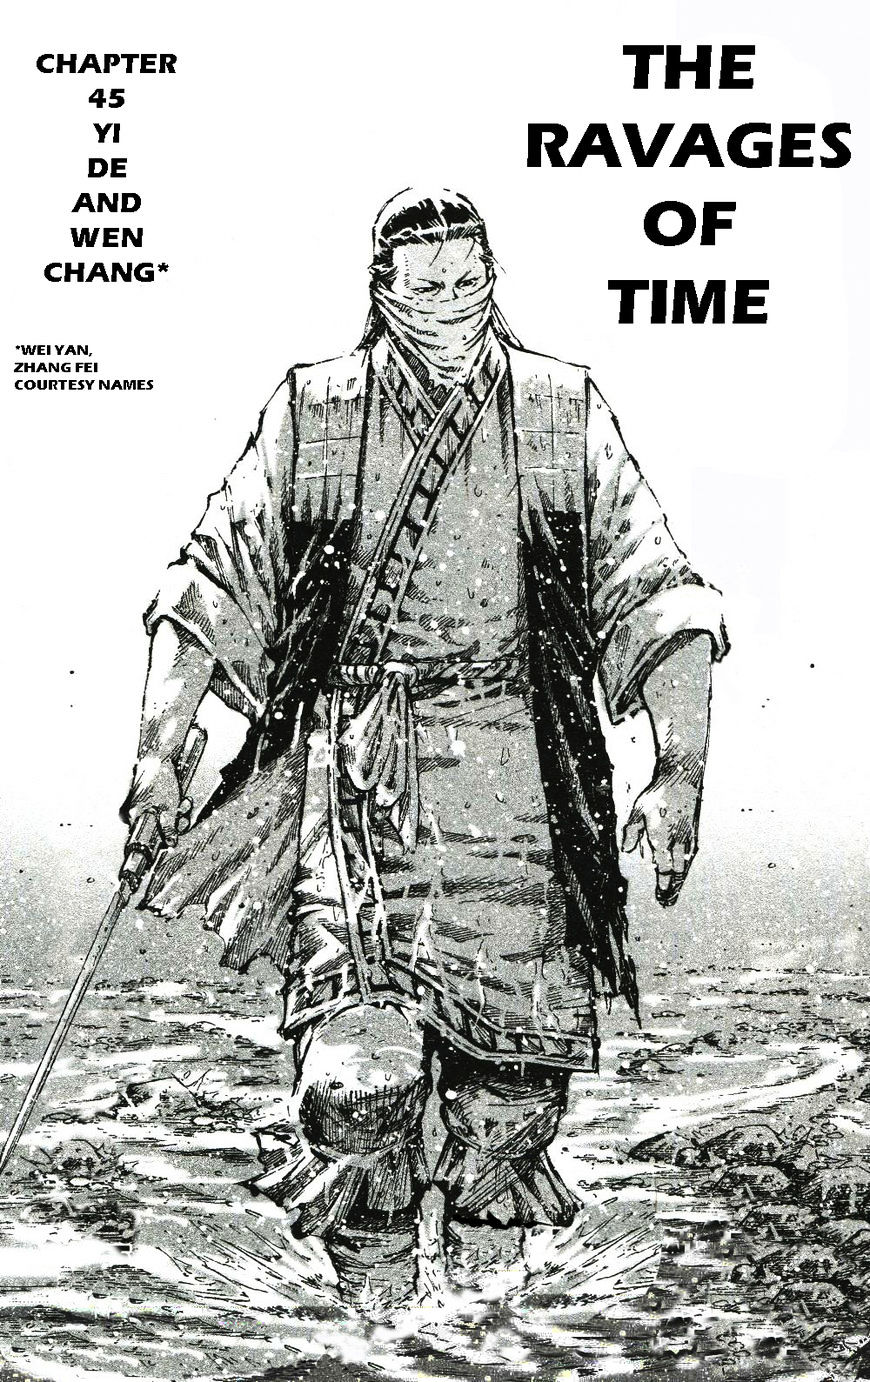 The Ravages Of Time Vol.45 Chapter 459 : Yi De And Wen Chang - Picture 3